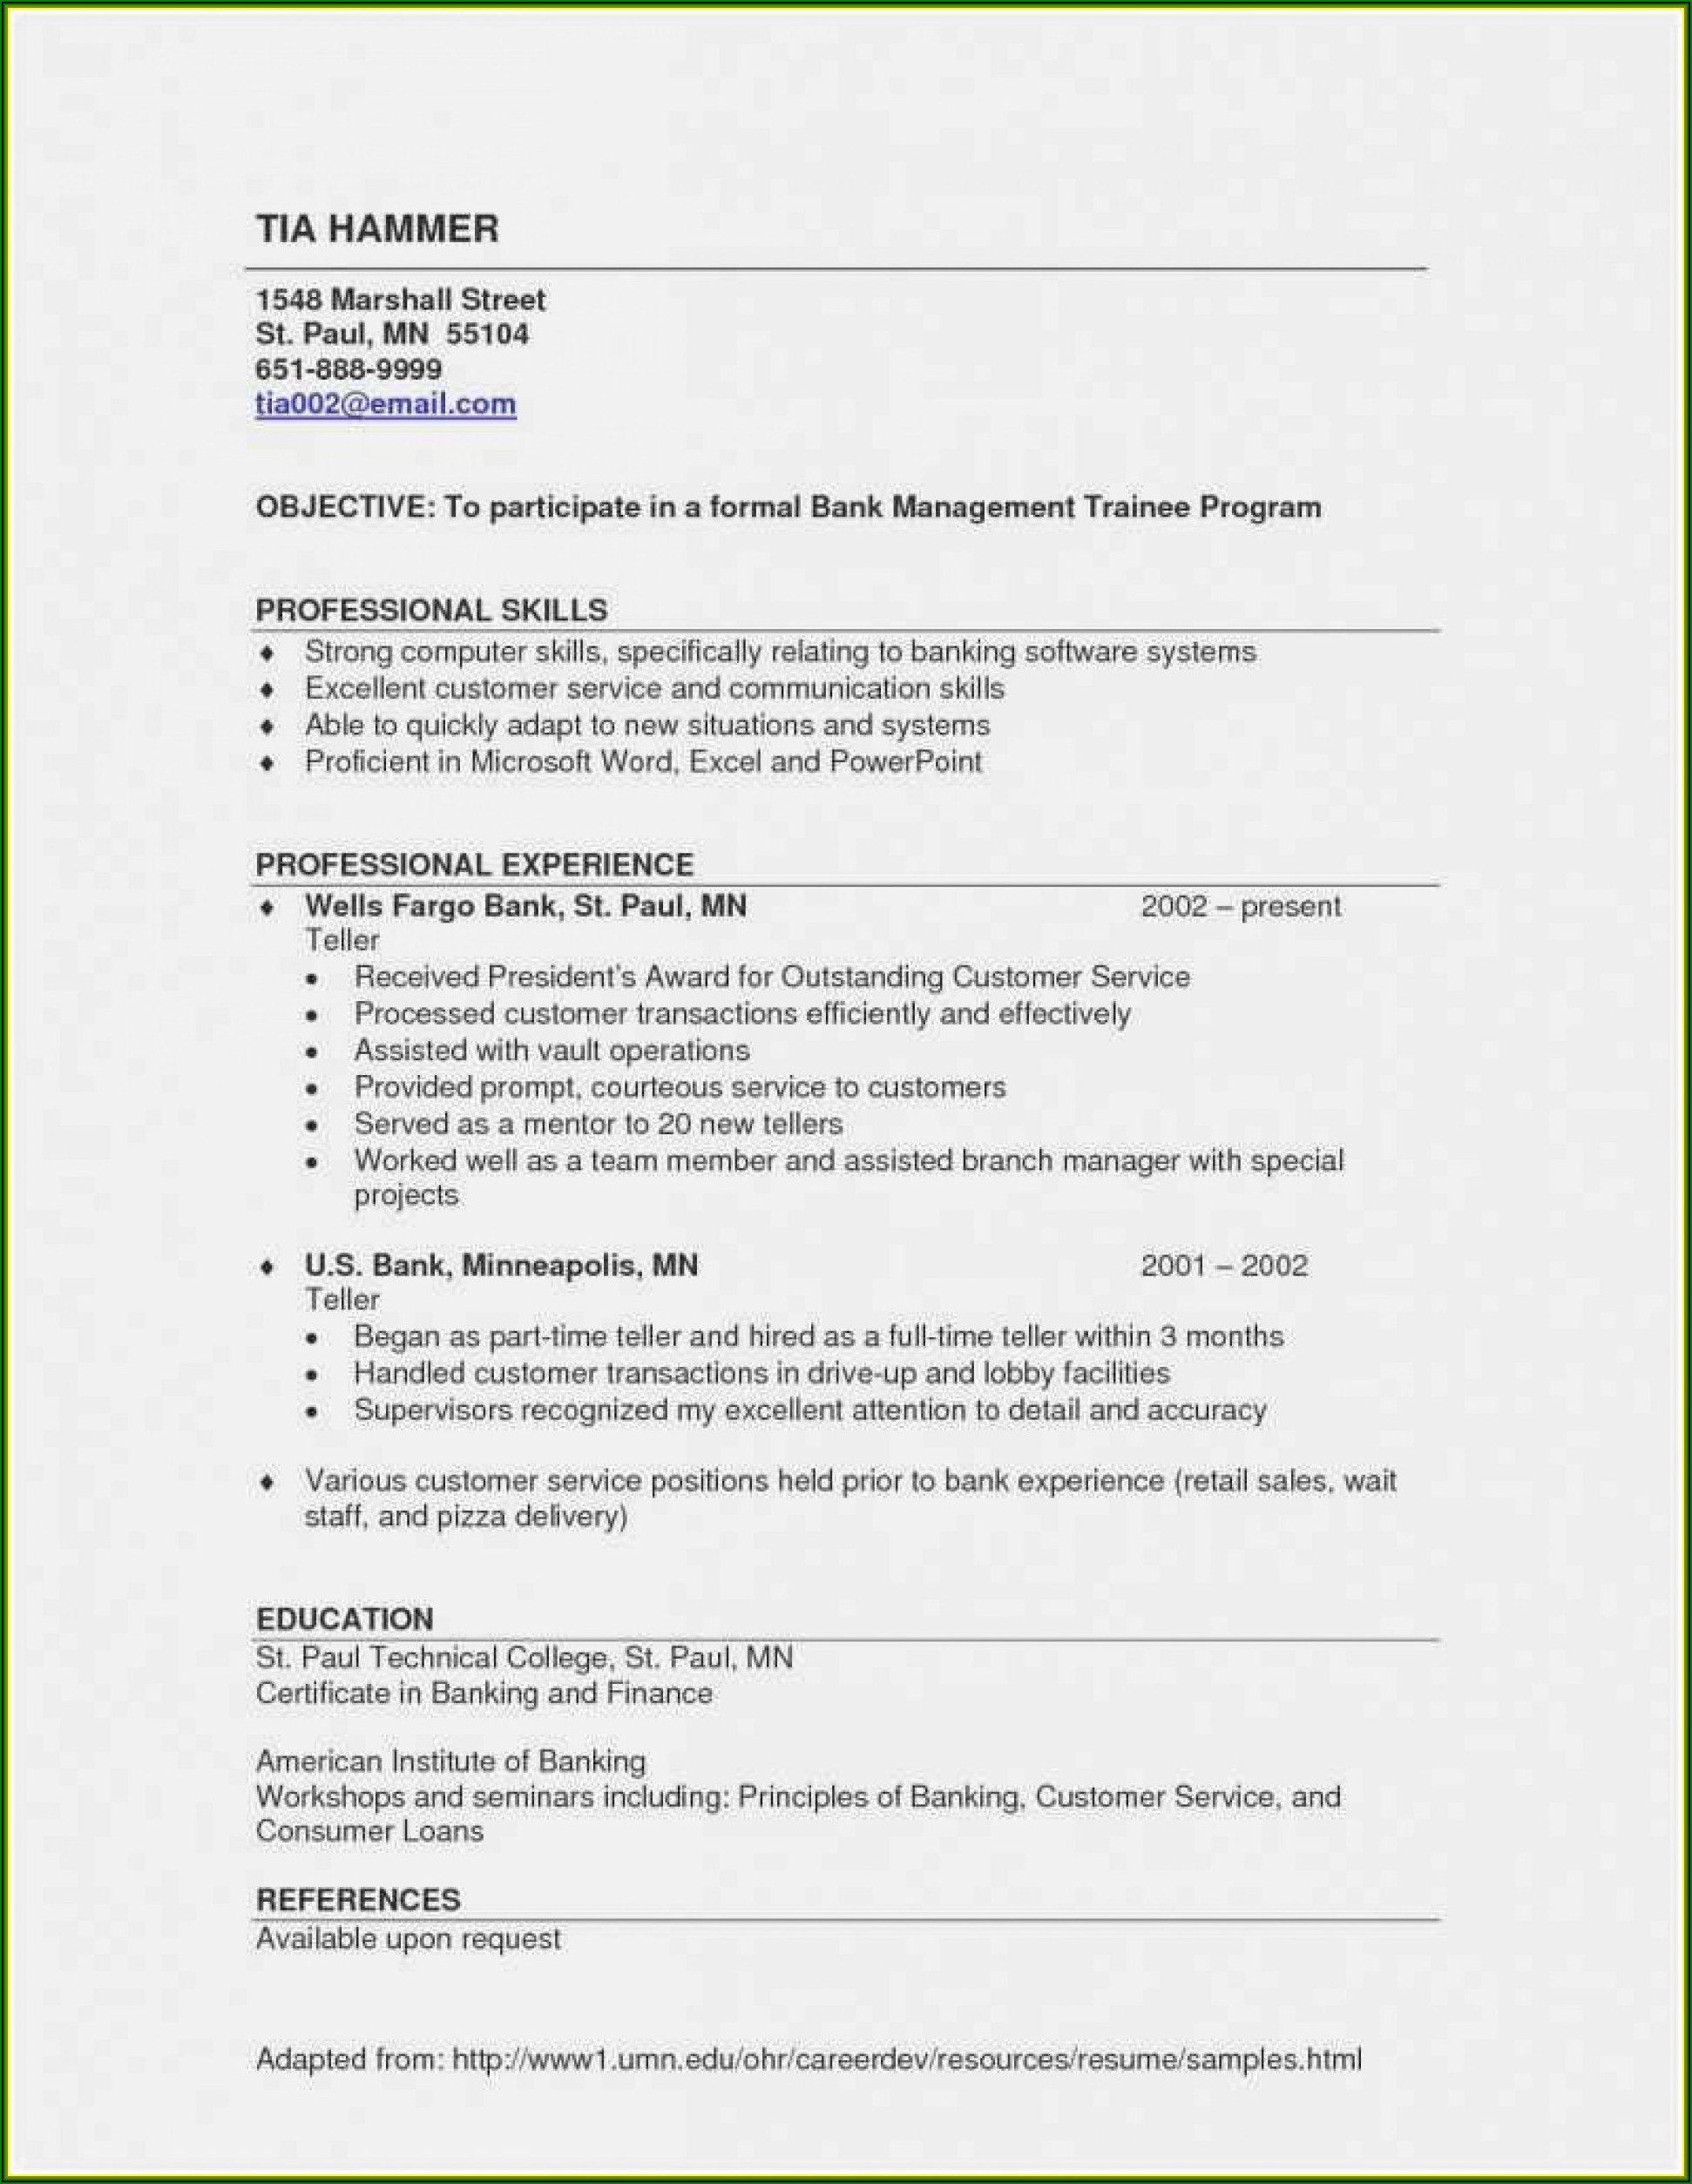 Sample Resume For Teachers In India Word Format Download